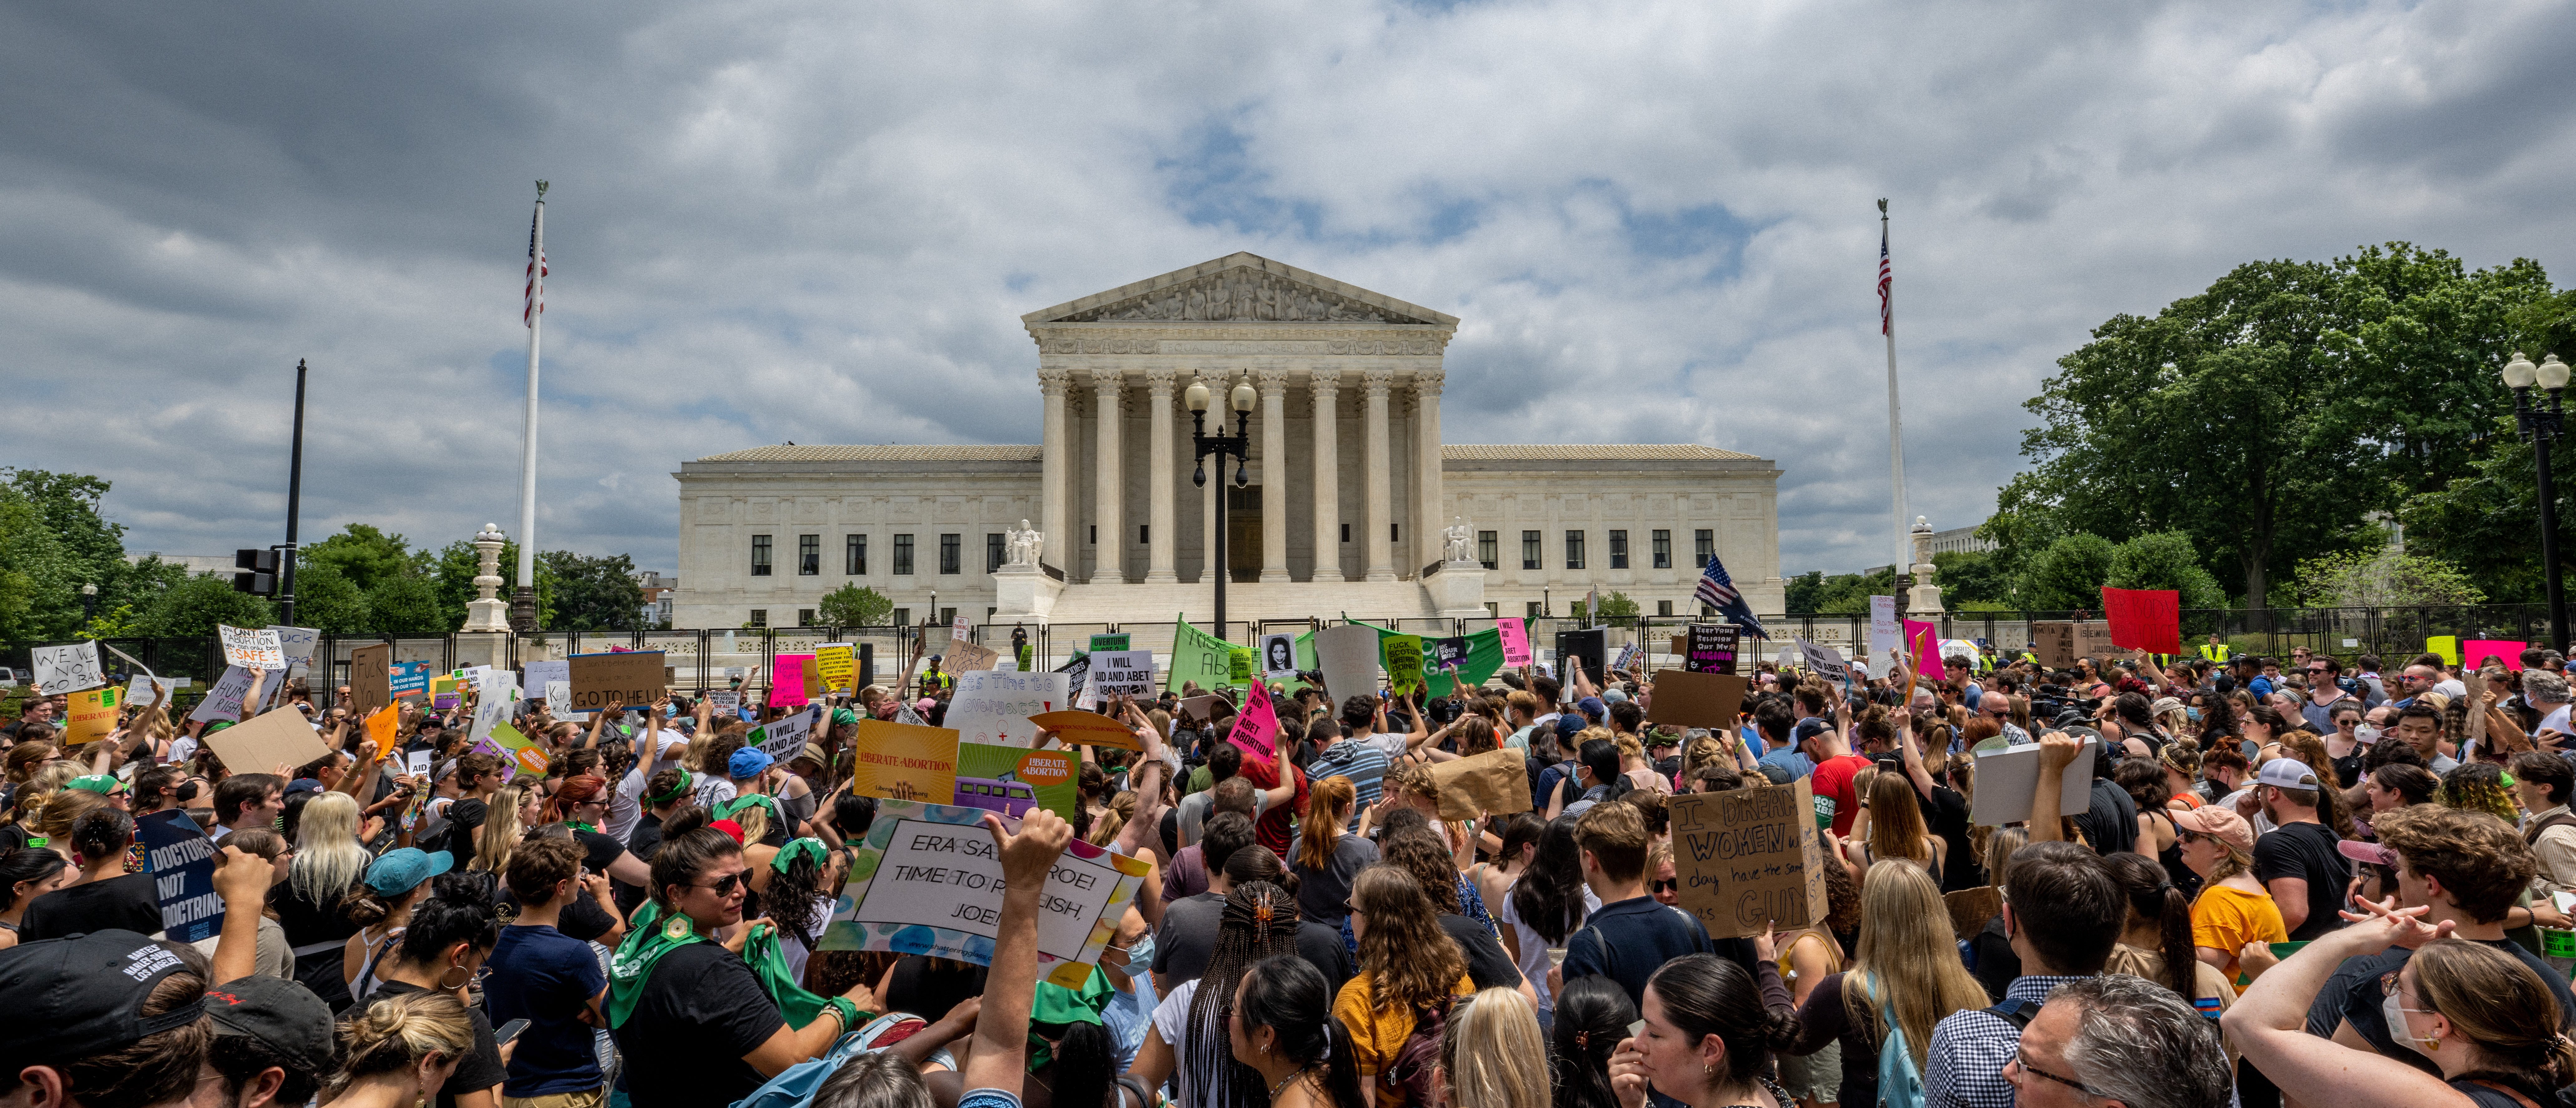 WASHINGTON, DC - JUNE 24: People protest in response to the Dobbs v Jackson Women's Health Organization ruling in front of the U.S. Supreme Court on June 24, 2022 in Washington, DC. (Photo by Brandon Bell/Getty Images)